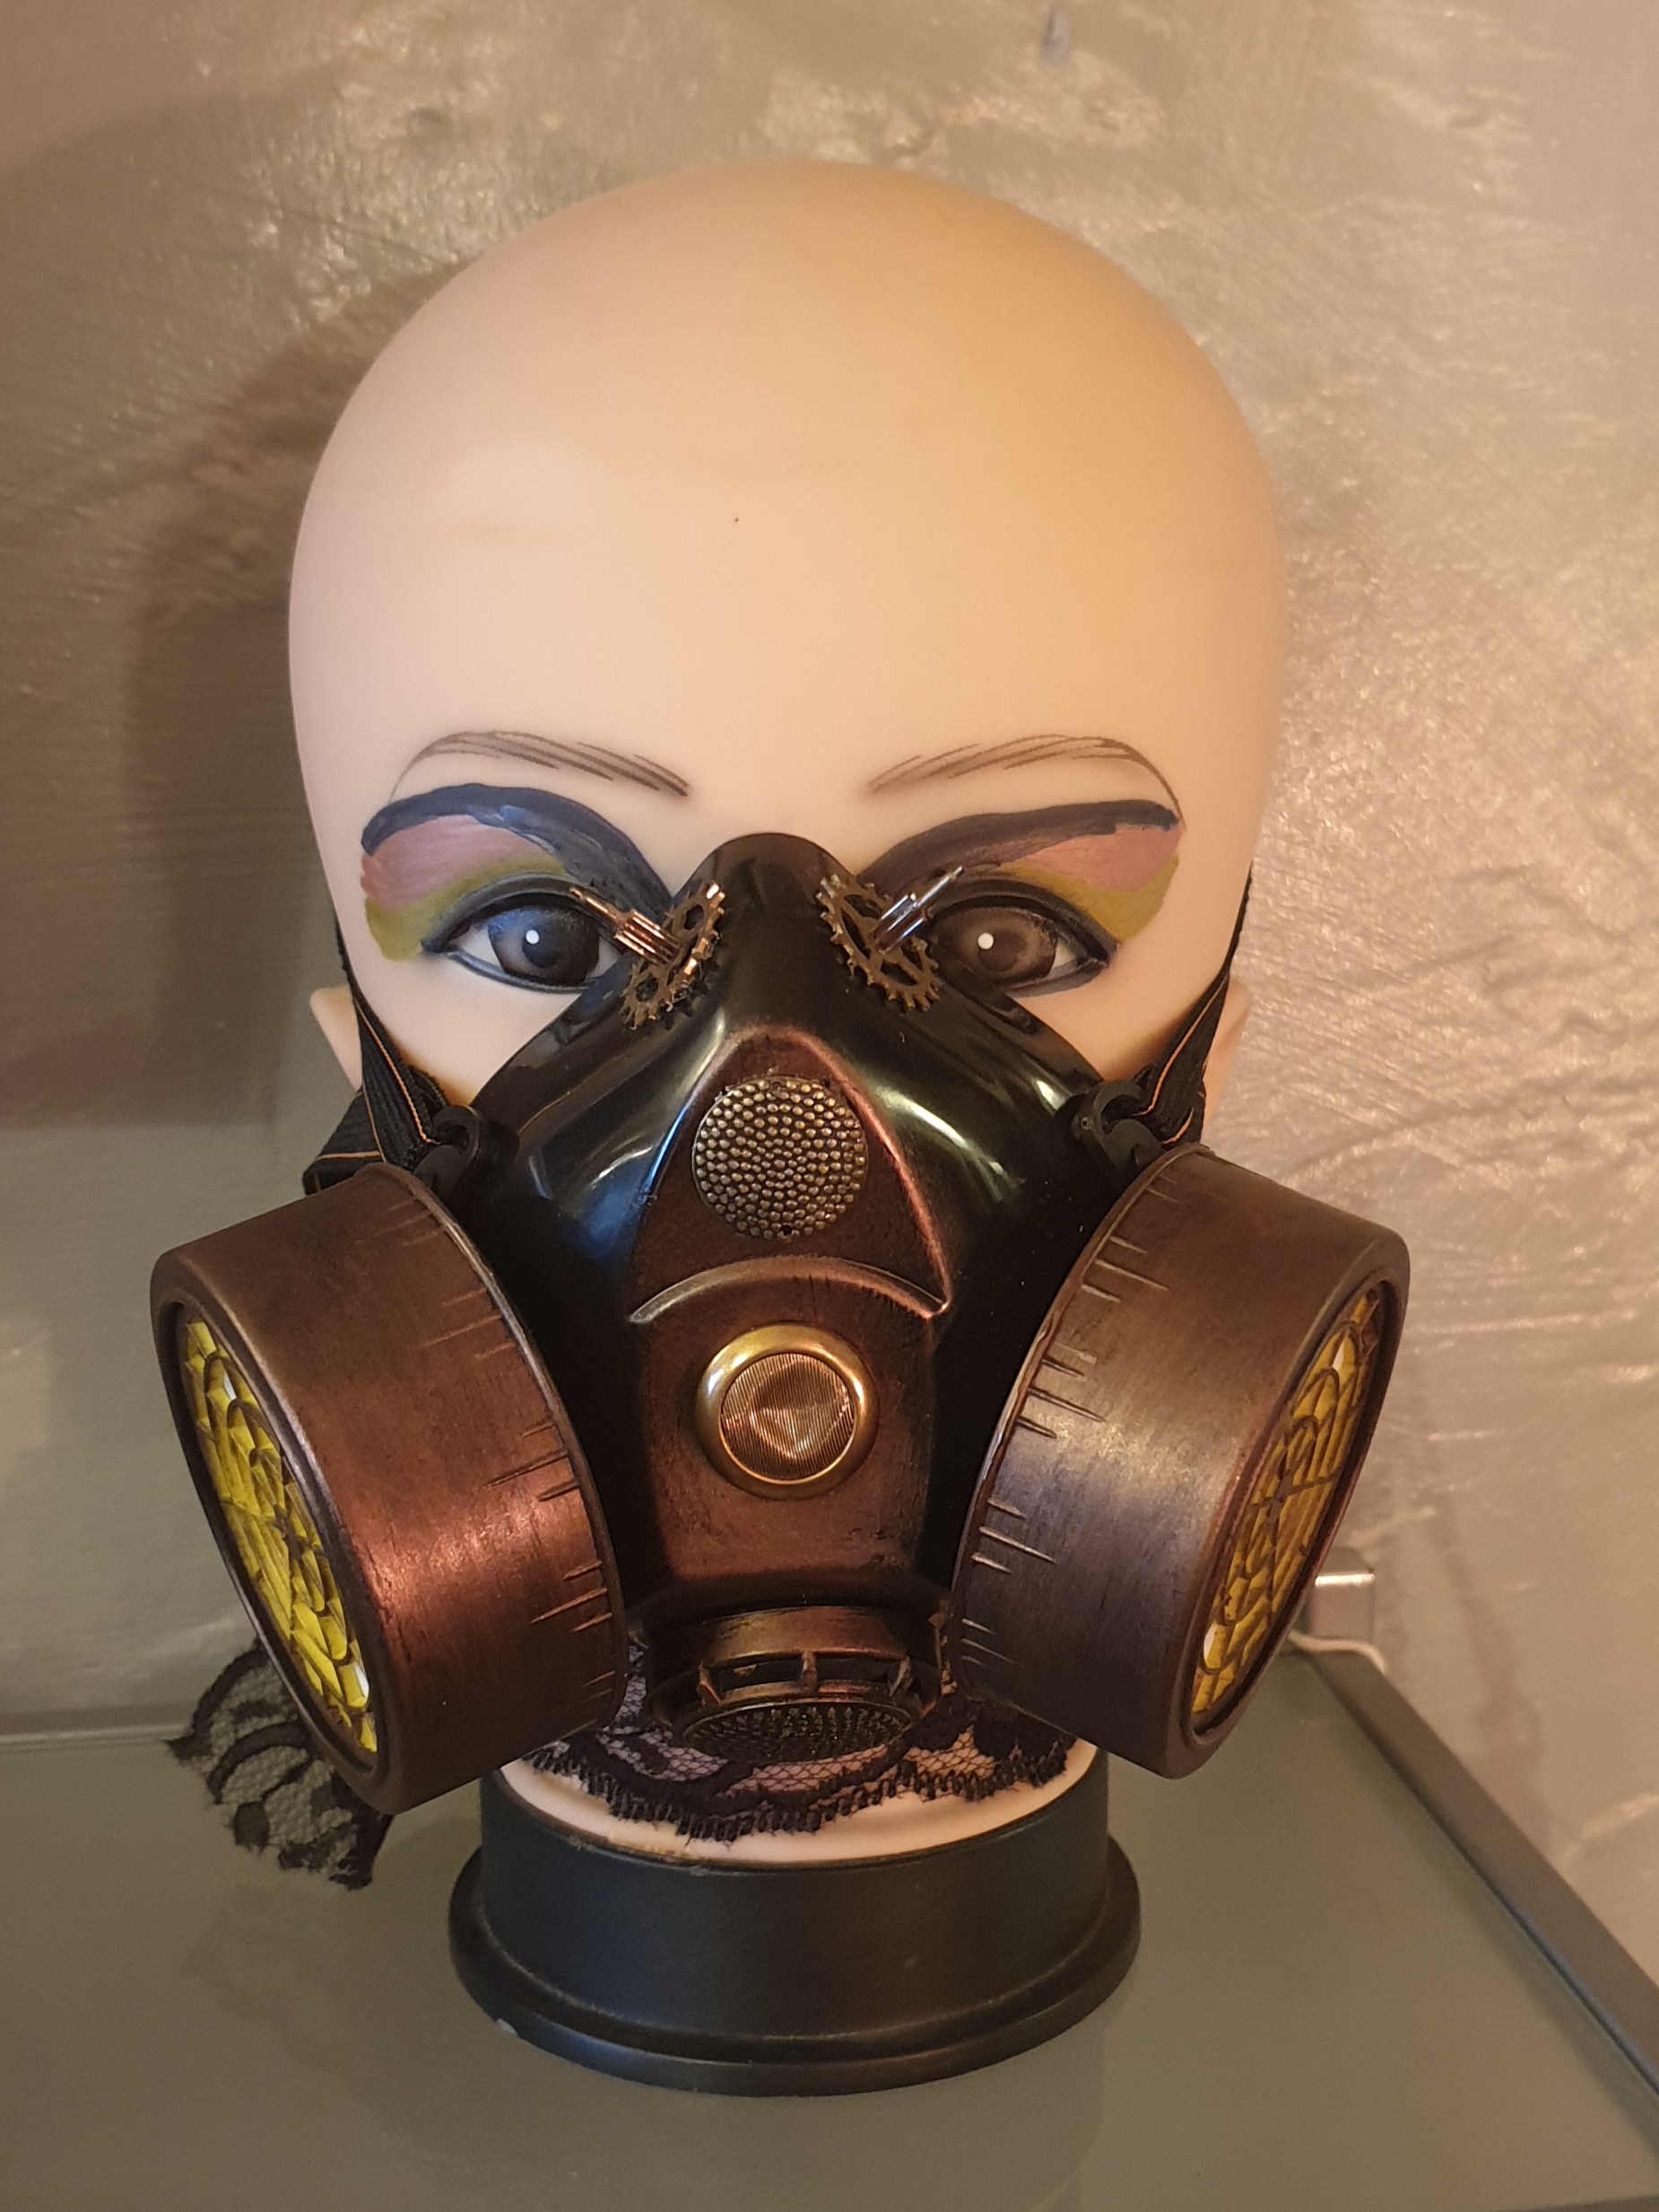 Face Mask, twin filter, Steampunk style